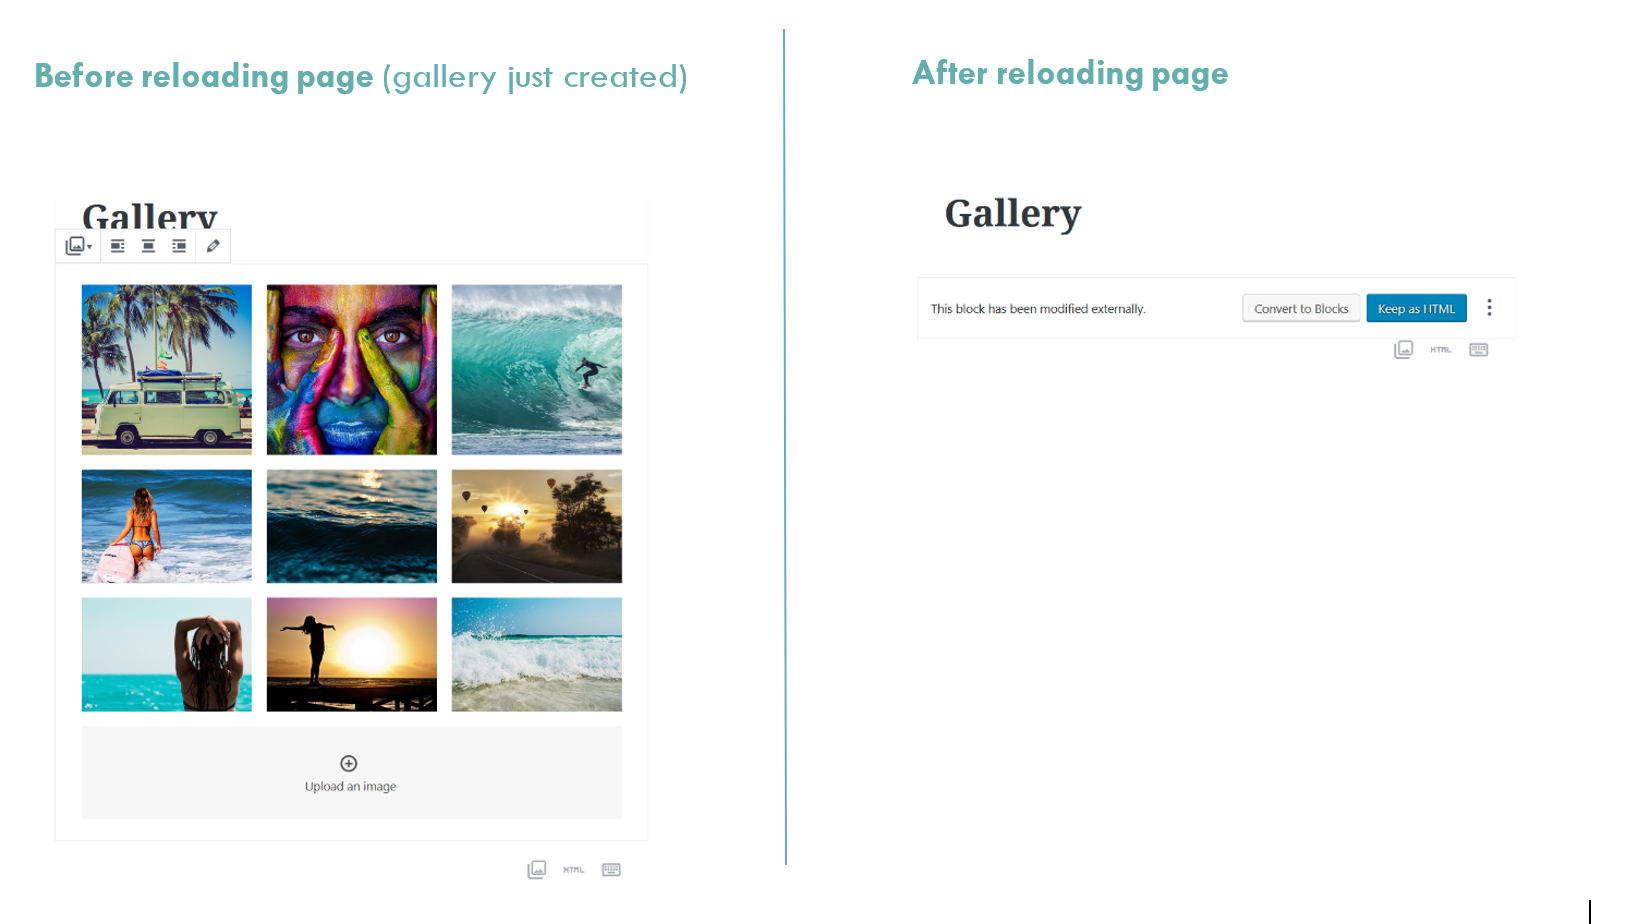 Gallery block - before and after reload